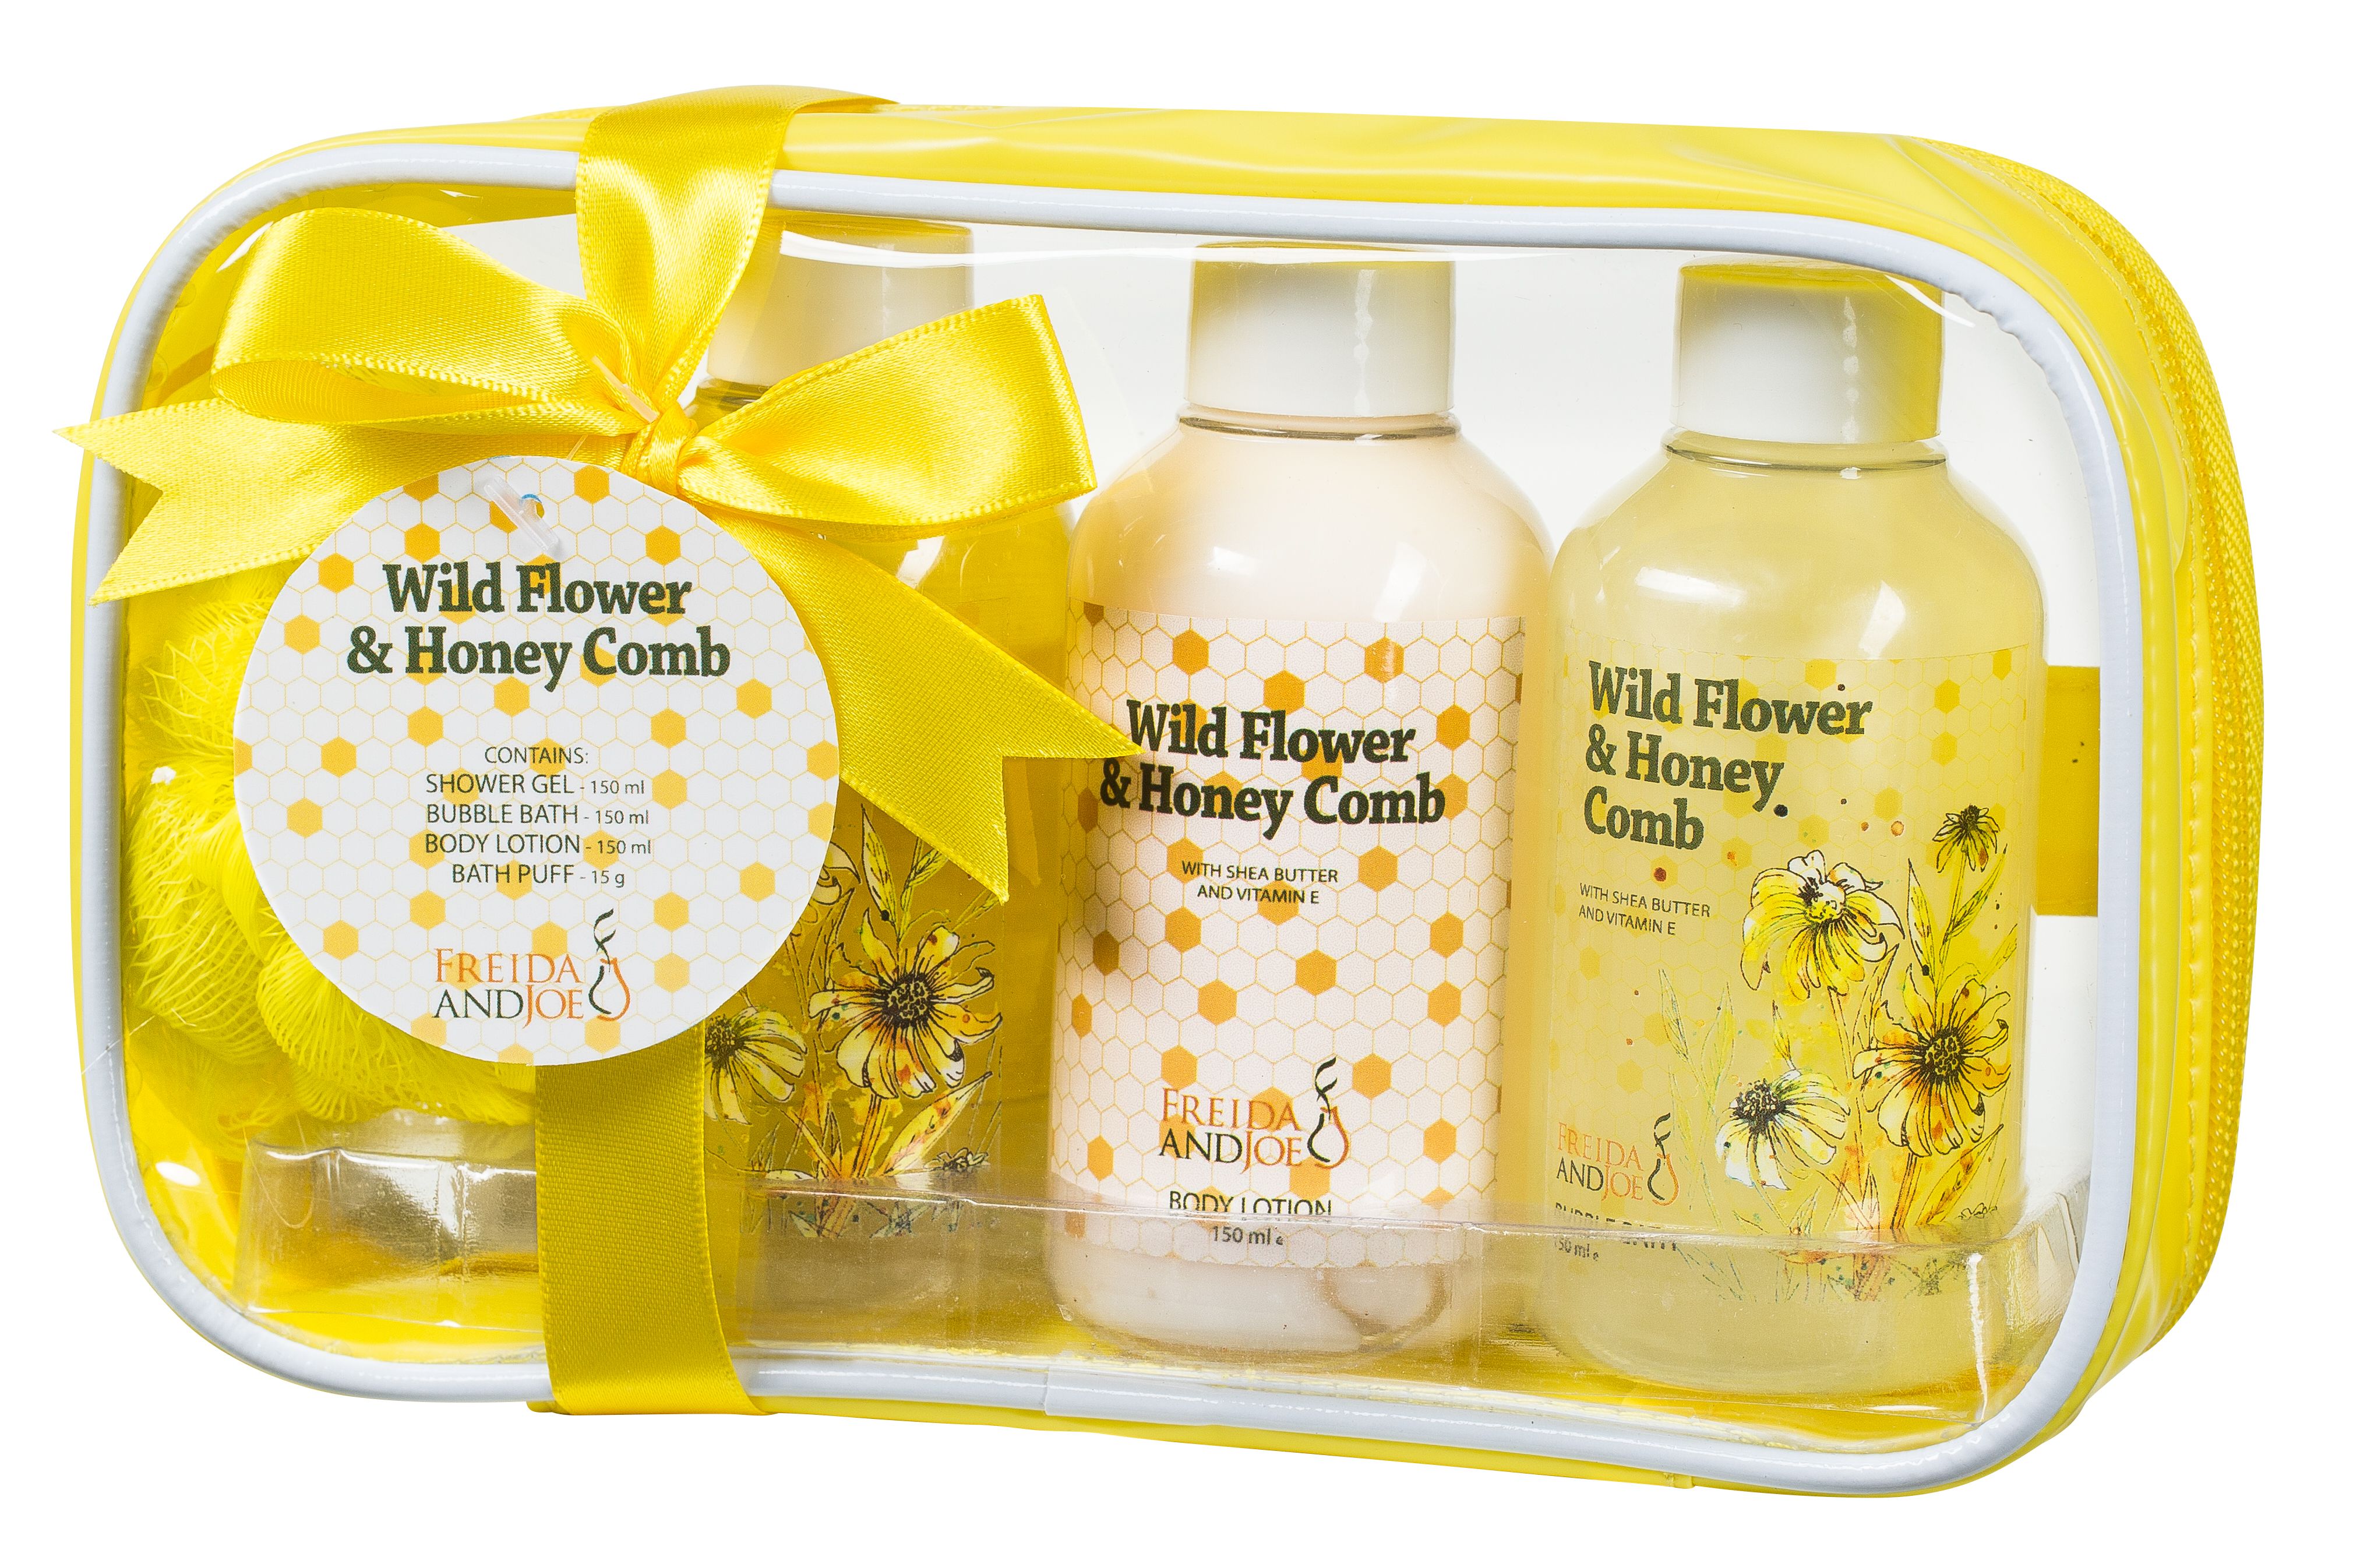 Freida & Joe Deluxe Natural Rustic Wild Flower and Honey Comb Bathroom Spa Kit - Gift for Her - image 1 of 4